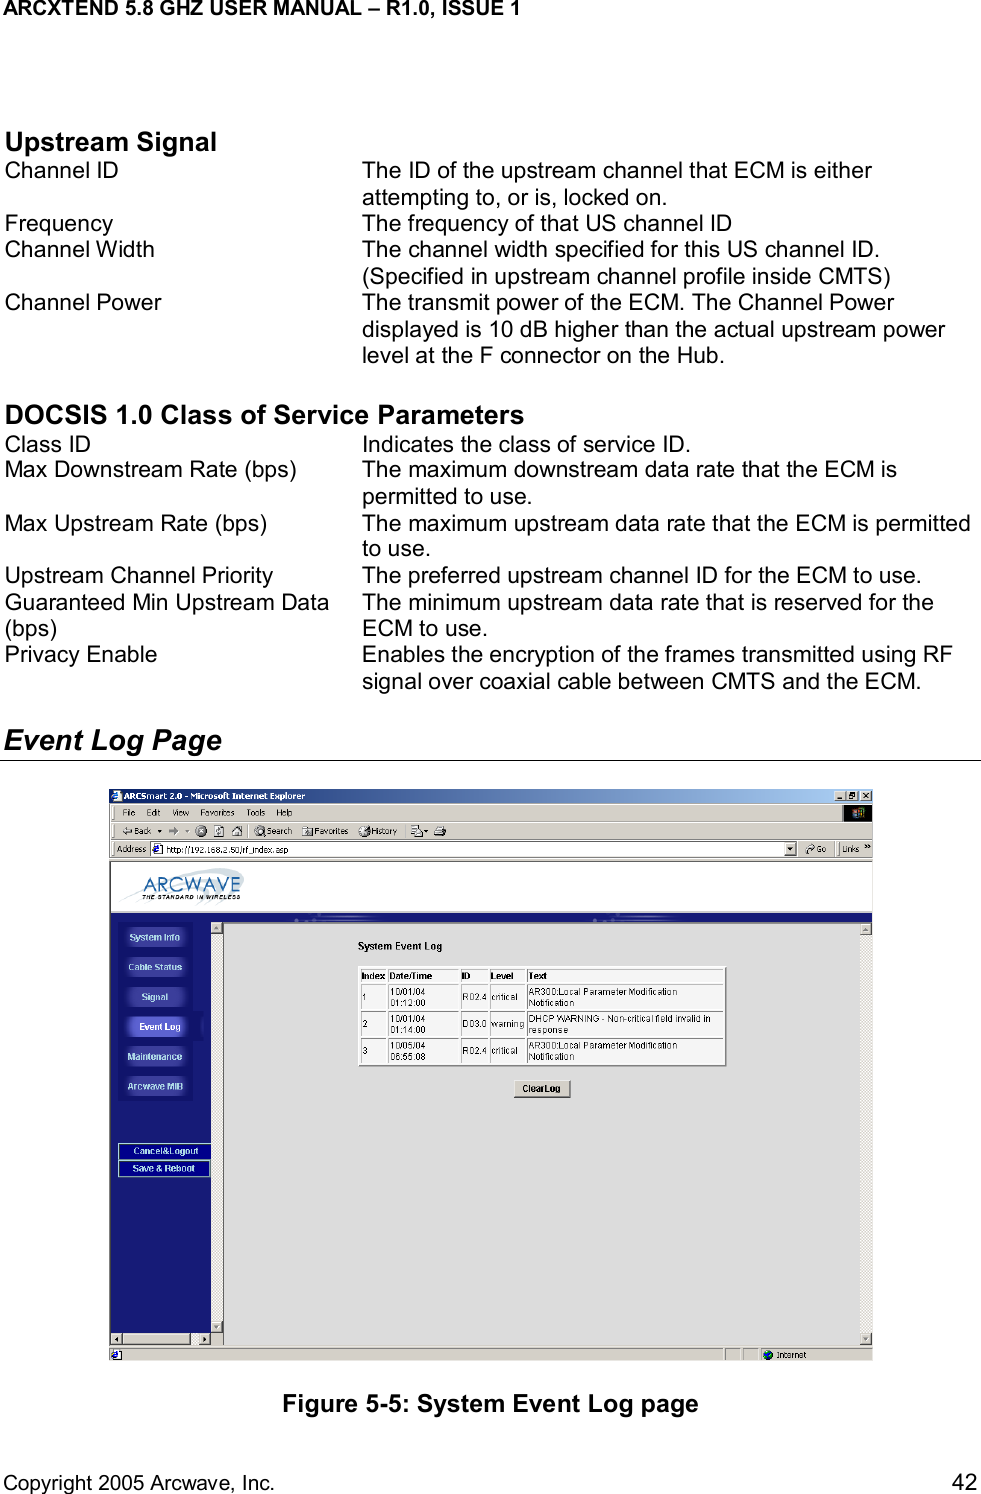 ARCXTEND 5.8 GHZ USER MANUAL – R1.0, ISSUE 1  Copyright 2005 Arcwave, Inc.    42  Upstream Signal Channel ID  The ID of the upstream channel that ECM is either attempting to, or is, locked on. Frequency  The frequency of that US channel ID Channel Width  The channel width specified for this US channel ID. (Specified in upstream channel profile inside CMTS) Channel Power  The transmit power of the ECM. The Channel Power displayed is 10 dB higher than the actual upstream power level at the F connector on the Hub.  DOCSIS 1.0 Class of Service Parameters Class ID  Indicates the class of service ID. Max Downstream Rate (bps)  The maximum downstream data rate that the ECM is permitted to use. Max Upstream Rate (bps)  The maximum upstream data rate that the ECM is permitted to use. Upstream Channel Priority  The preferred upstream channel ID for the ECM to use. Guaranteed Min Upstream Data (bps) The minimum upstream data rate that is reserved for the ECM to use. Privacy Enable  Enables the encryption of the frames transmitted using RF signal over coaxial cable between CMTS and the ECM. Event Log Page  Figure 5-5: System Event Log page 